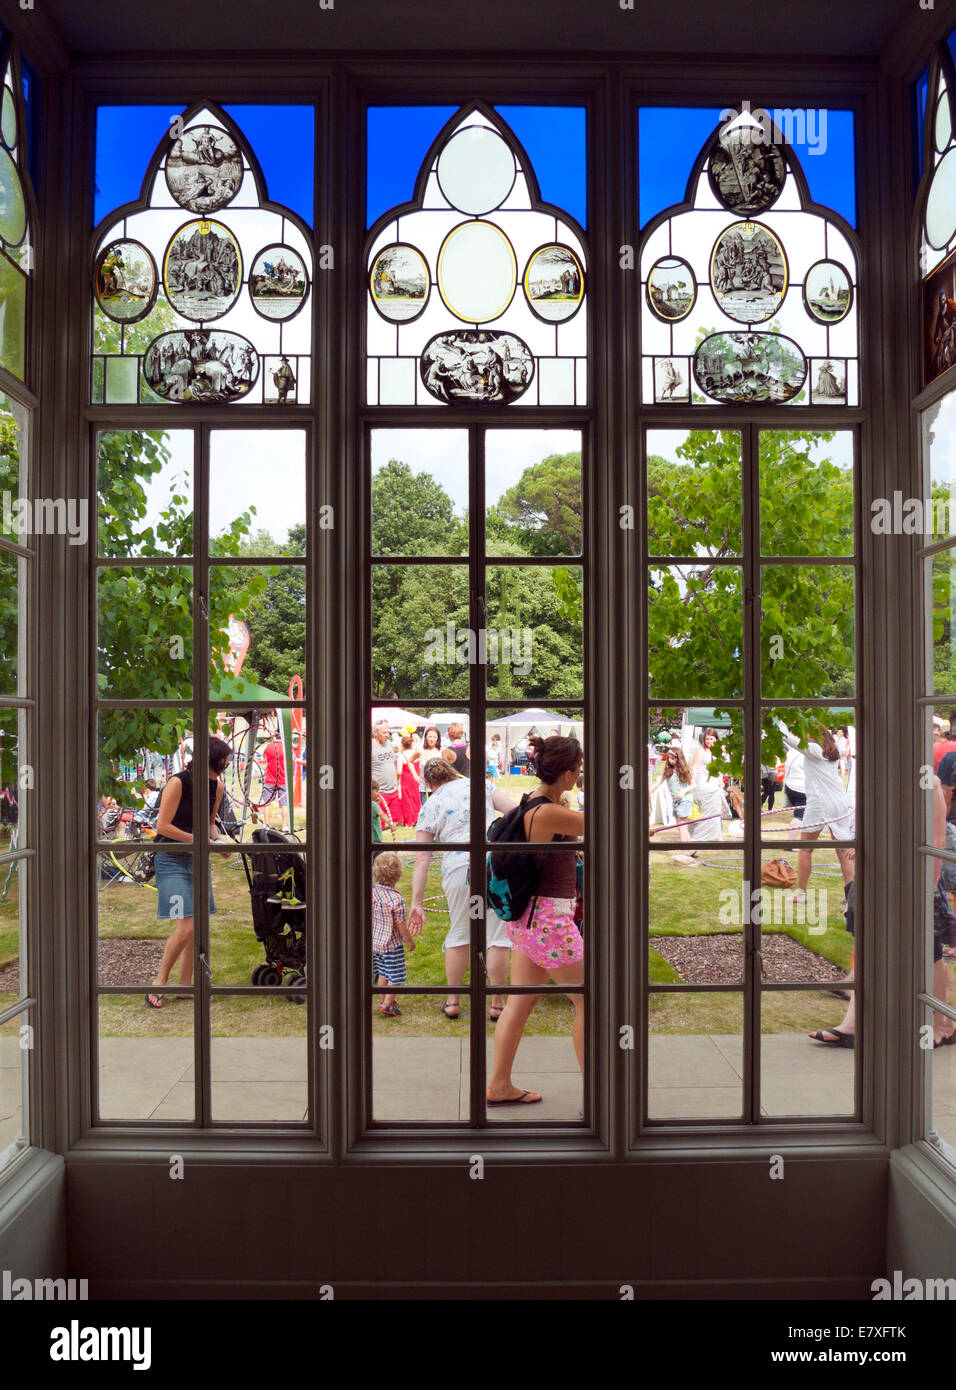 Garden Party Festival at Strawberry Hill House looking out of a stained glass window onto garden & people outside Twickenham in London UK KATHY DEWITT Stock Photo